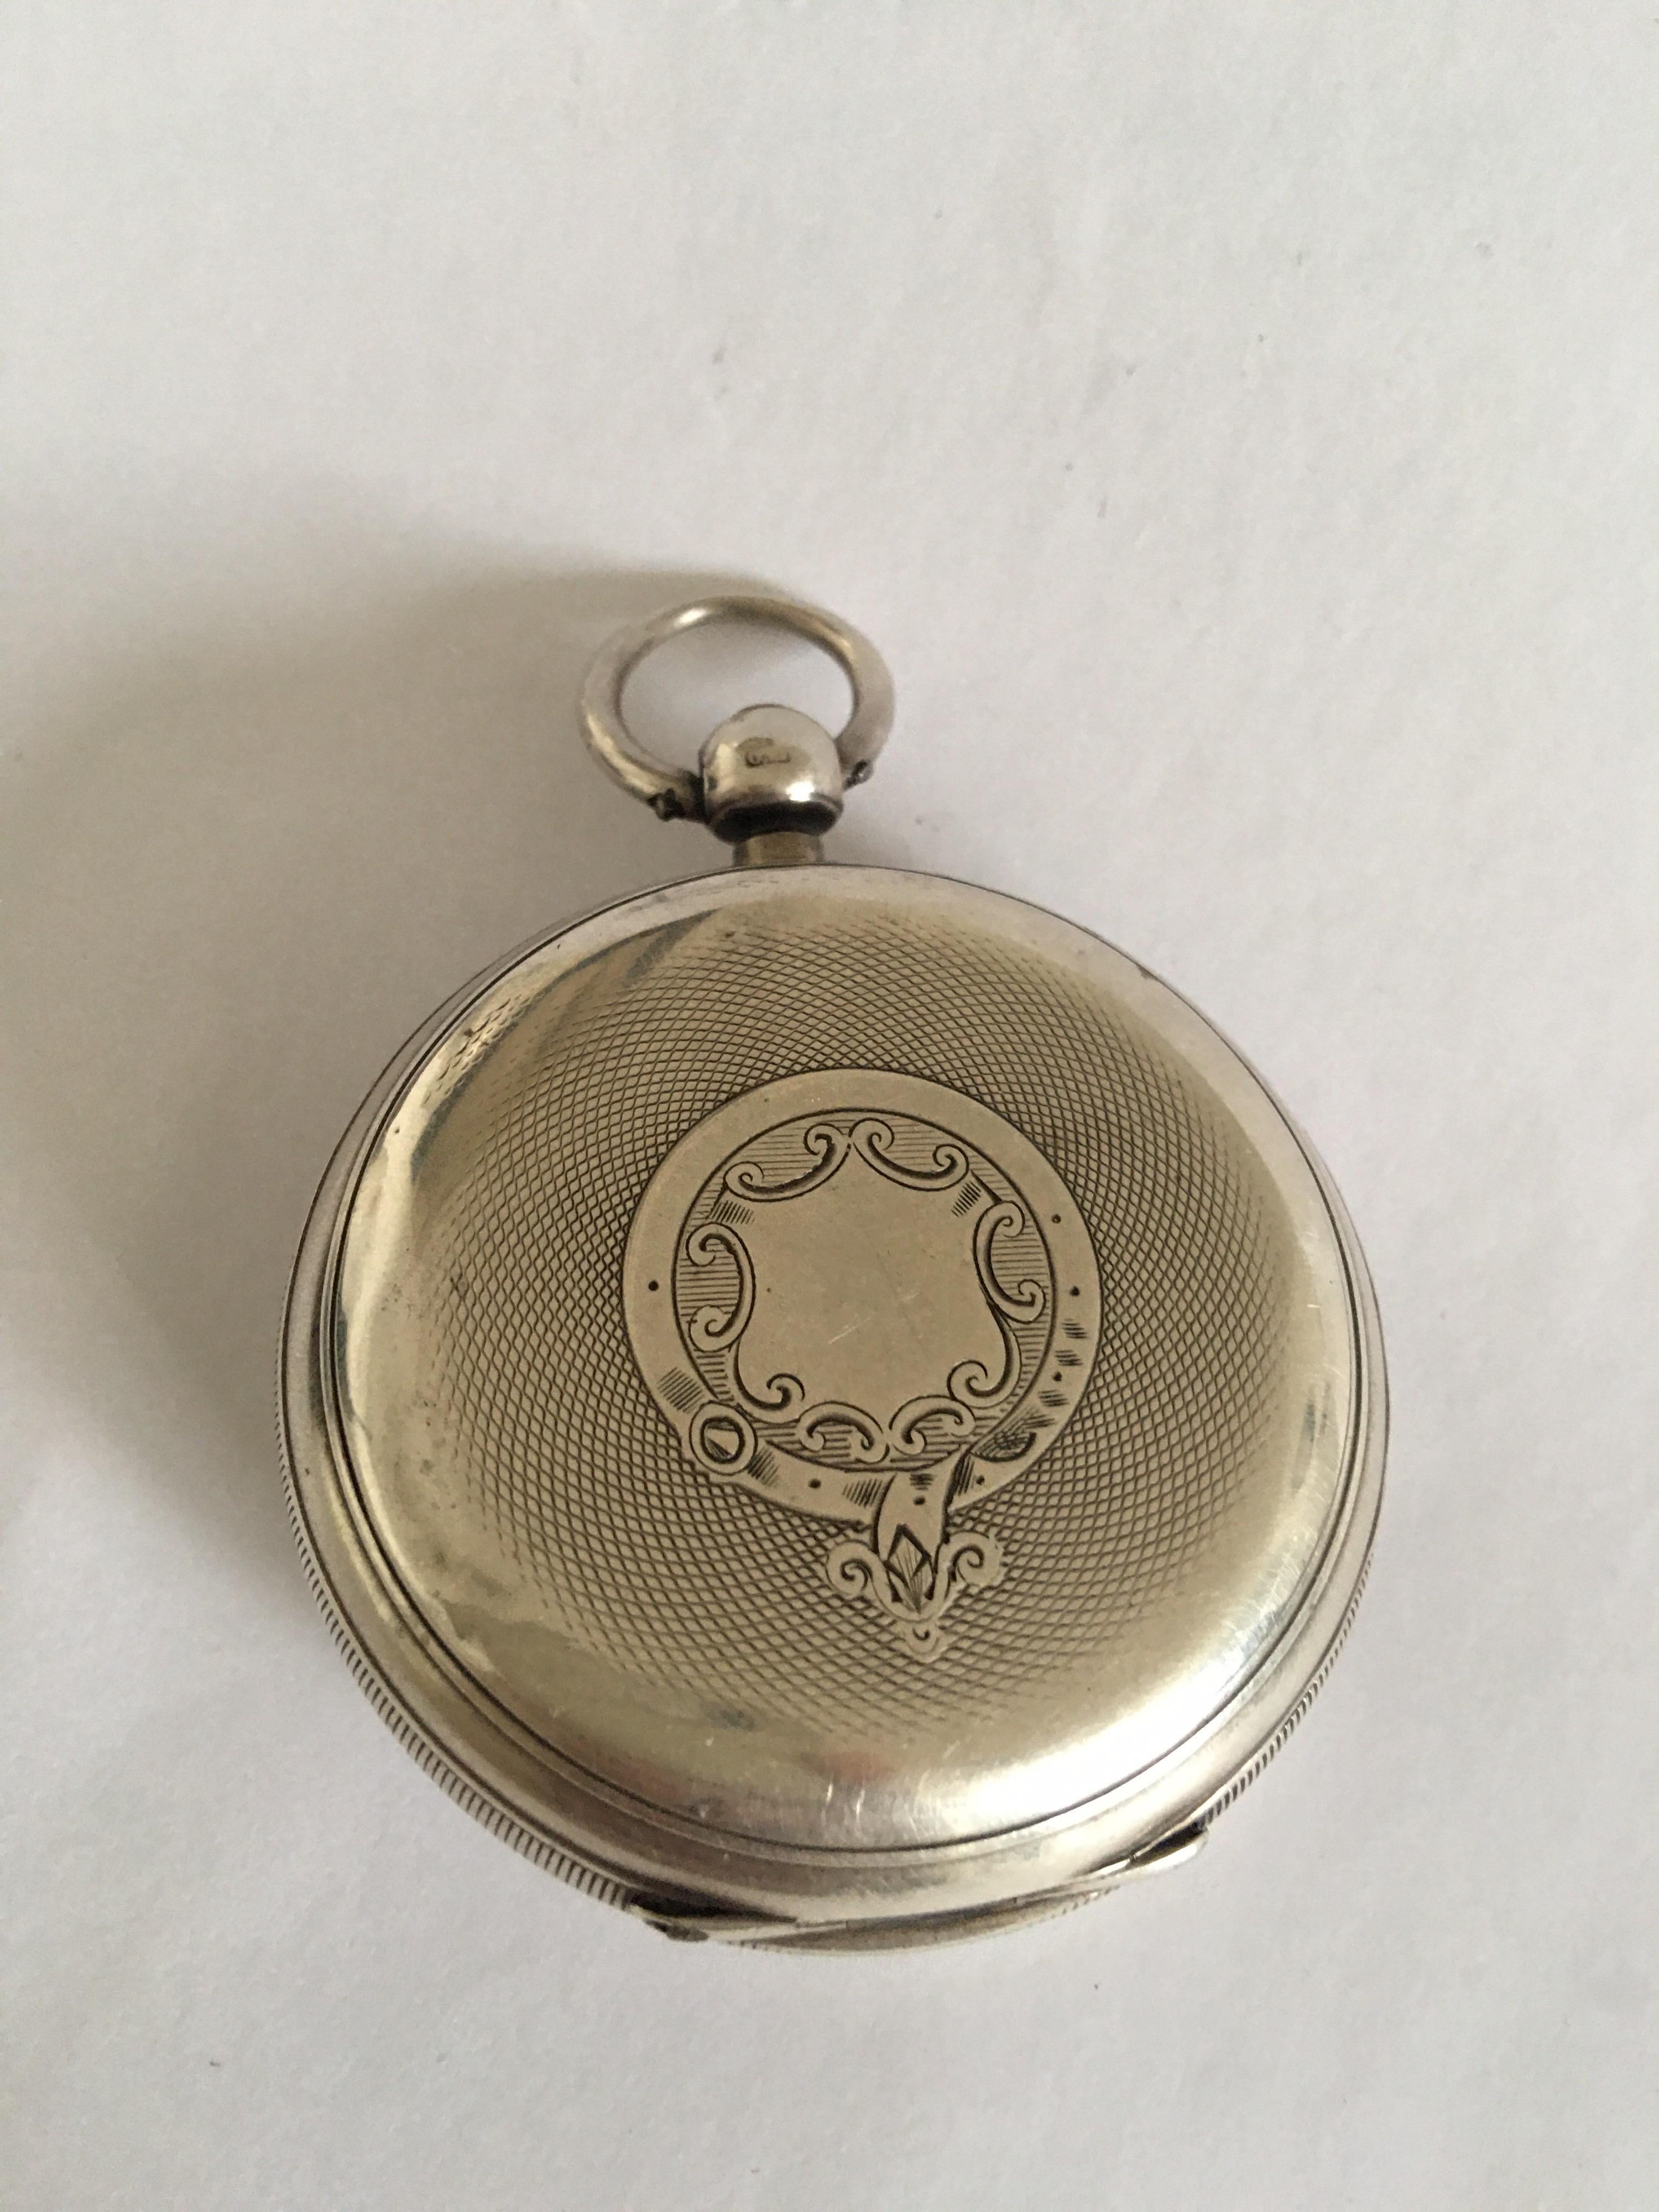 This watch is in good working condition and has been serviced. Tiny crack on the bottom dial and some dents on the back cover silver case as shown.

Please study the images carefully as form part of the description.